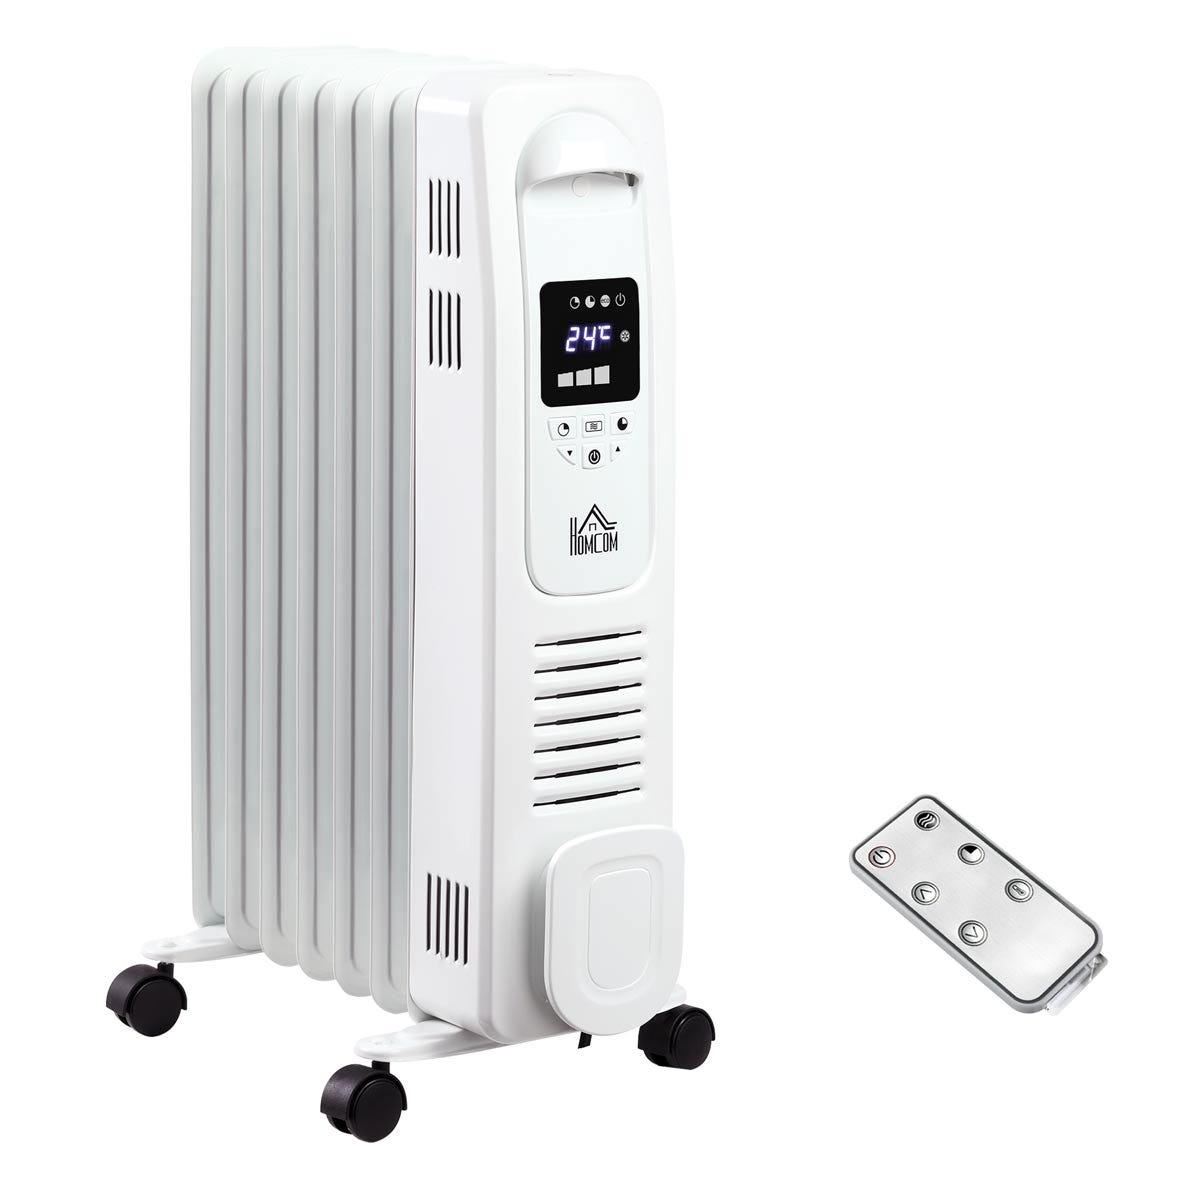 Etna Oil Filled 7 Pipe 1630W Radiator Space Heater with 3 Heat Settings & Remote Control - White